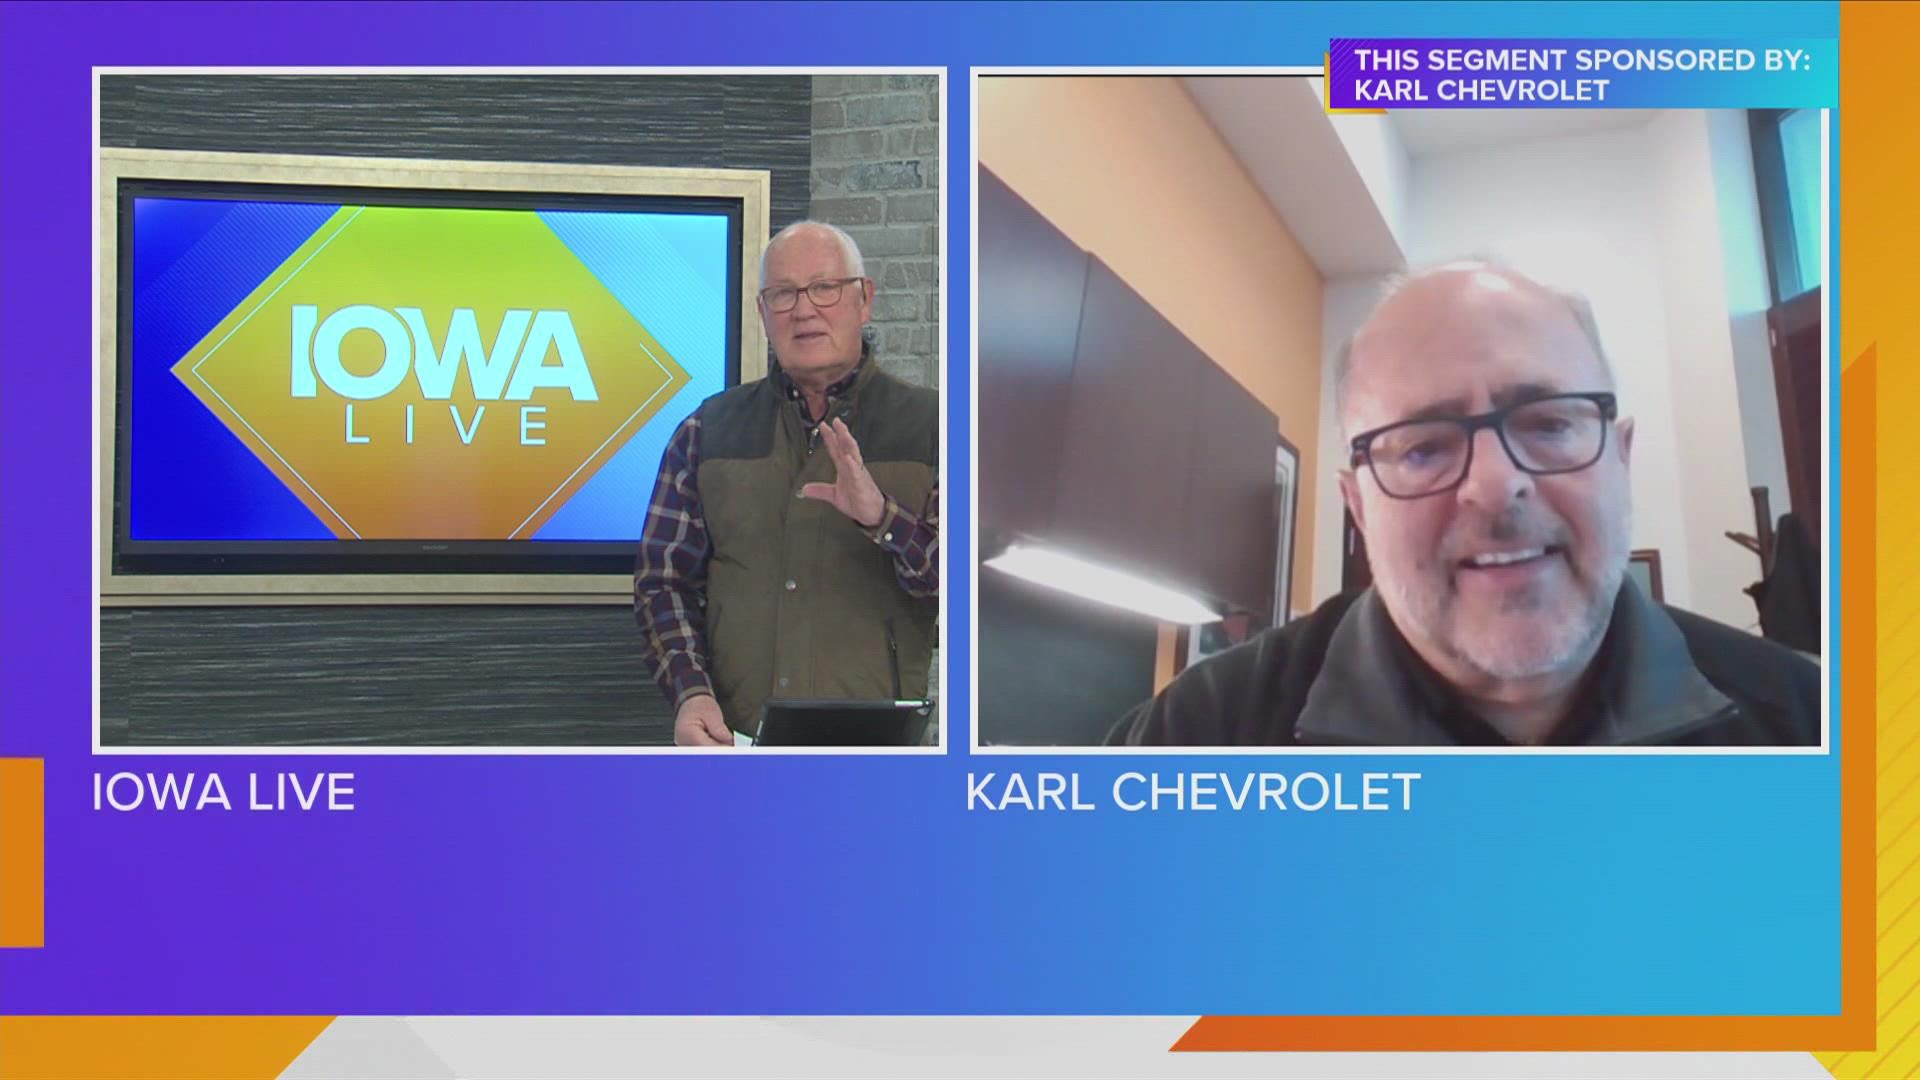 Bret Moyer talks about the Red Tag Sale Event PLUS $500 Chevy Cyber Cash available RIGHT NOW at Karl Chevrolet | Paid Content